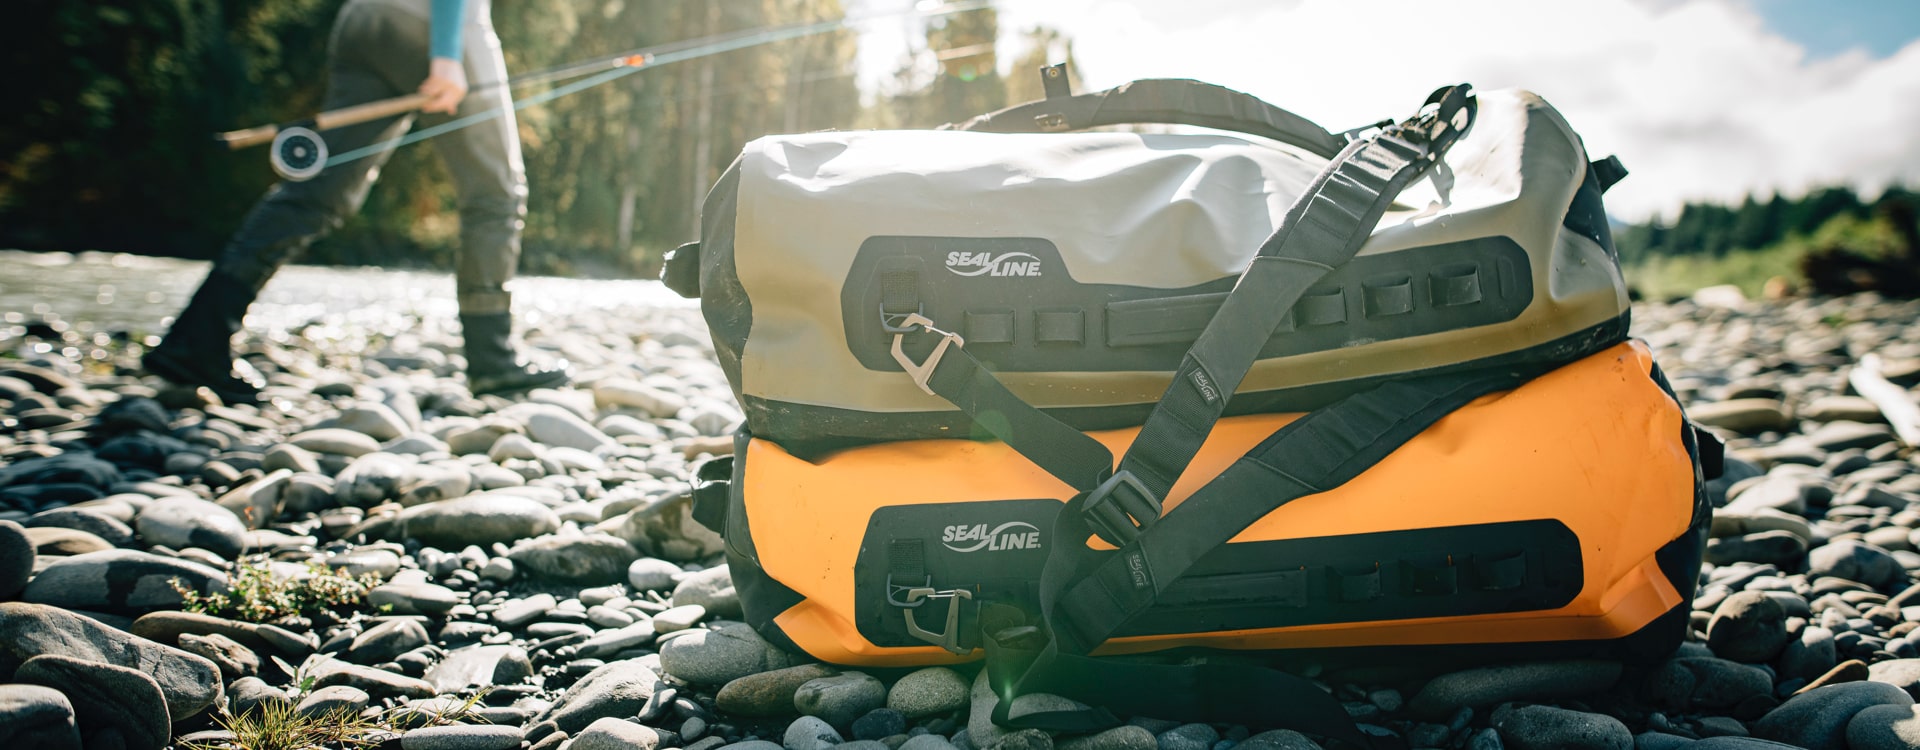 SealLine® gear protection - dry bags, backpacks, totes, duffles, organizers